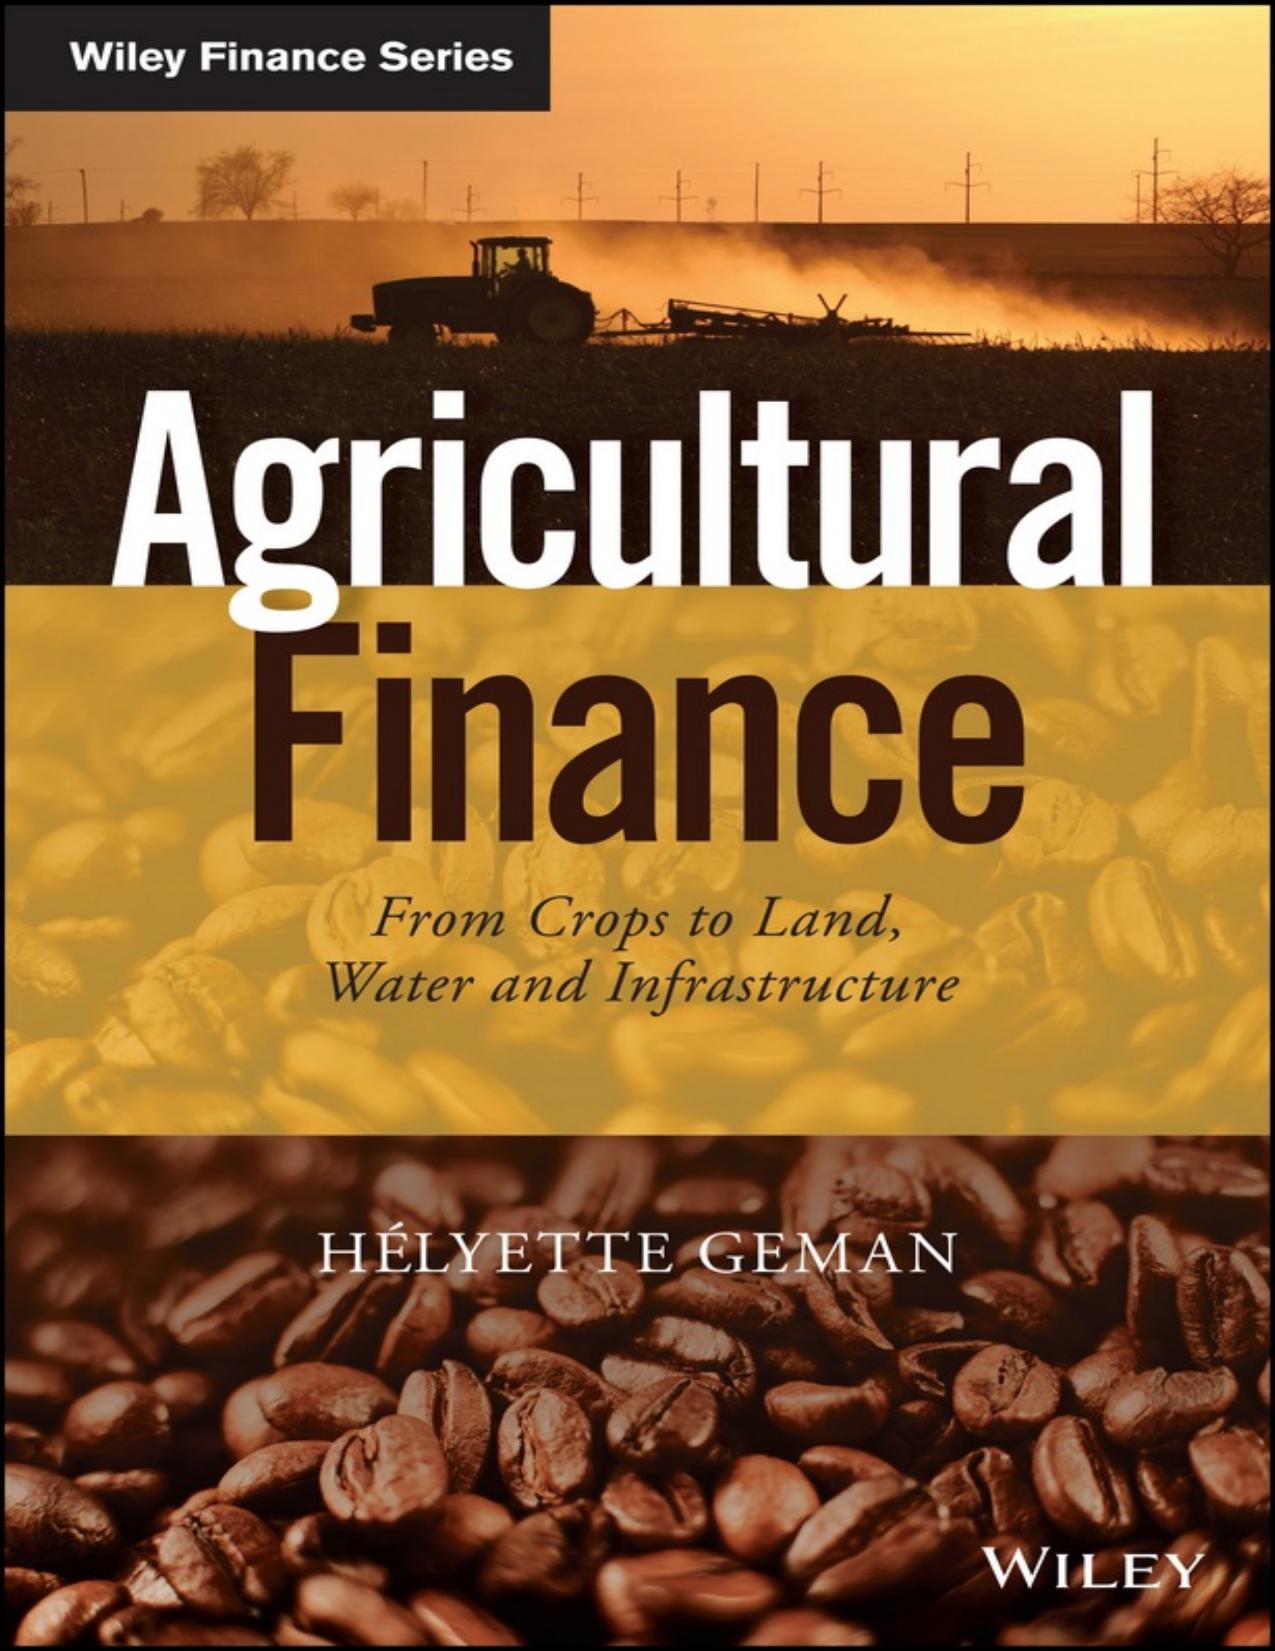 Agricultural Finance: From Crops to Land, Water and Infrastructure - PDFDrive.com